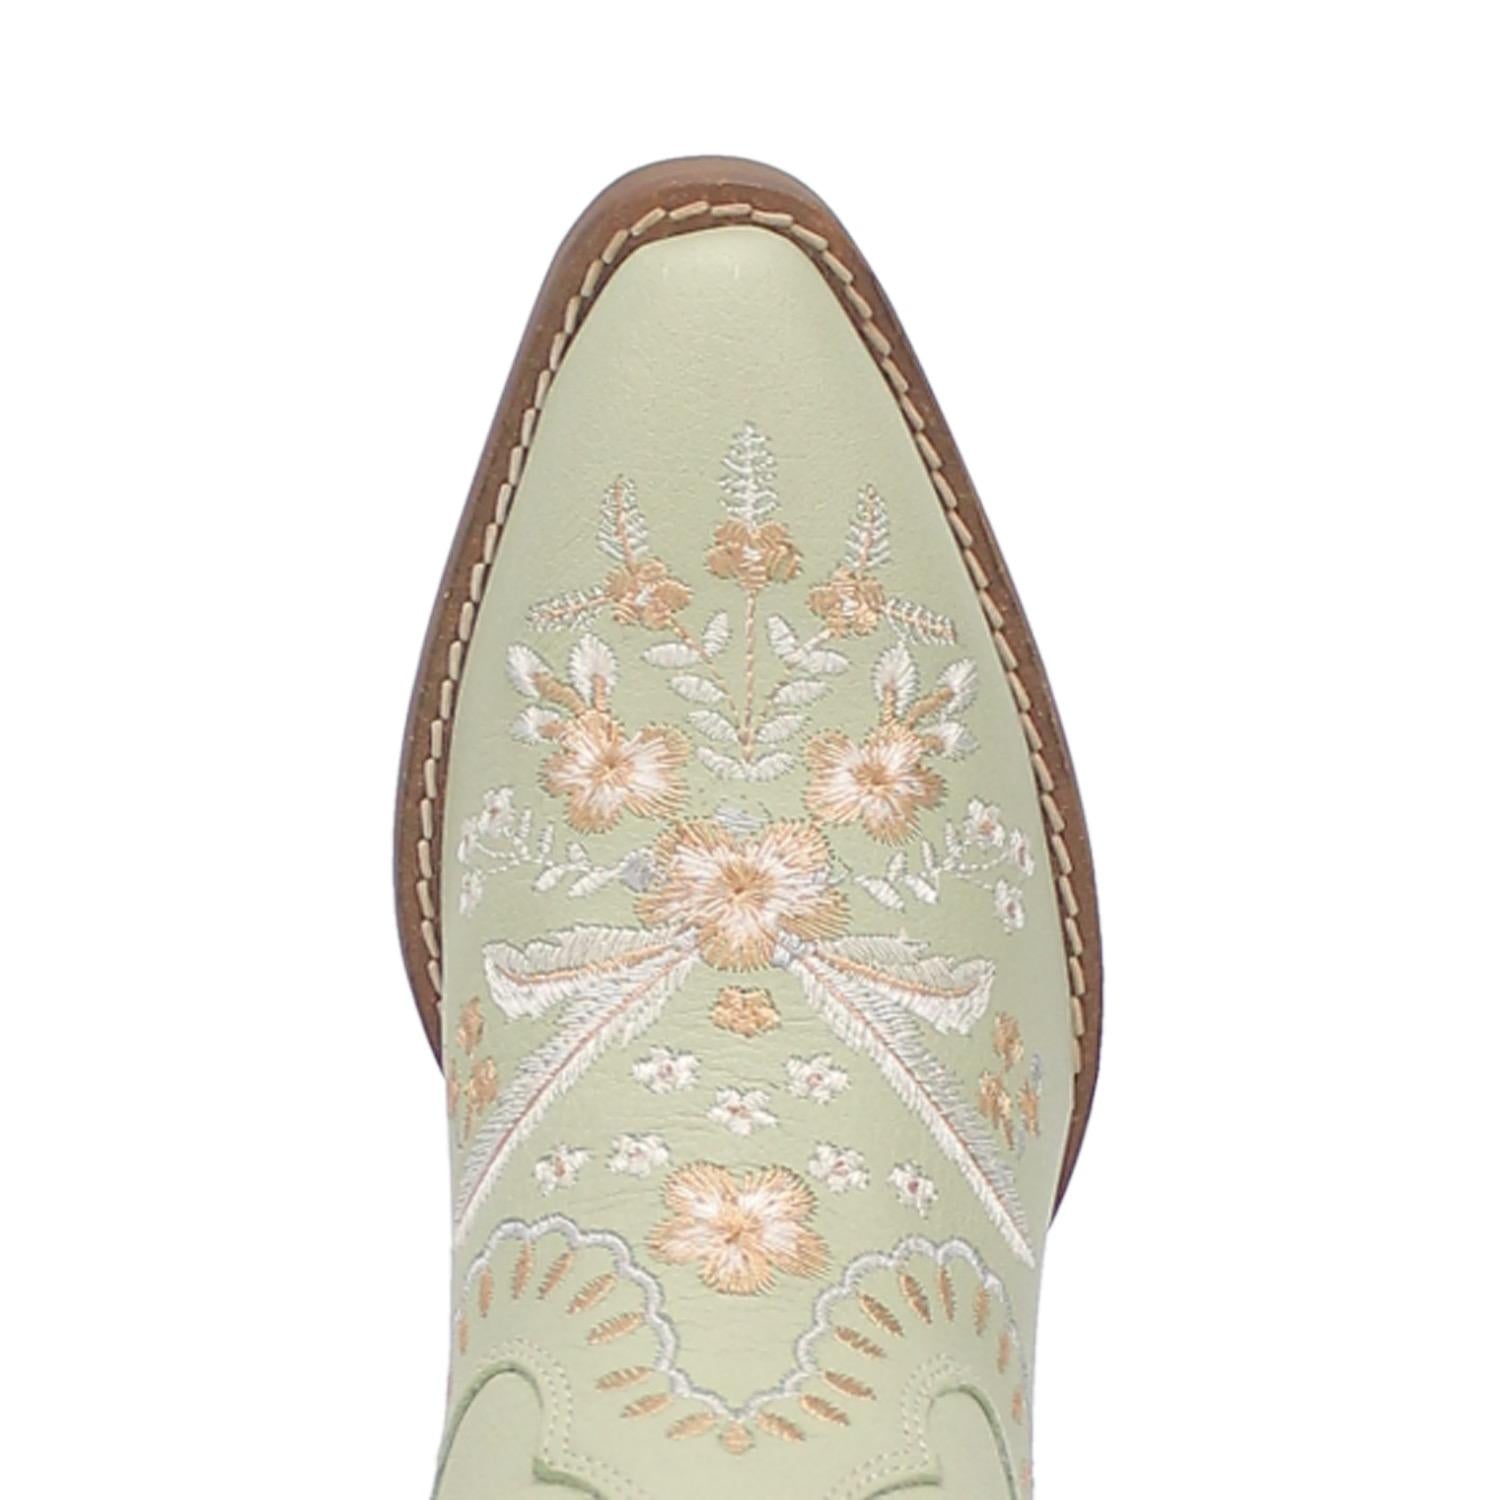 Online Exclusive | Dingo | Primrose Leather Floral Stitch Bootie in Mint **PREORDER - Giddy Up Glamour Boutique